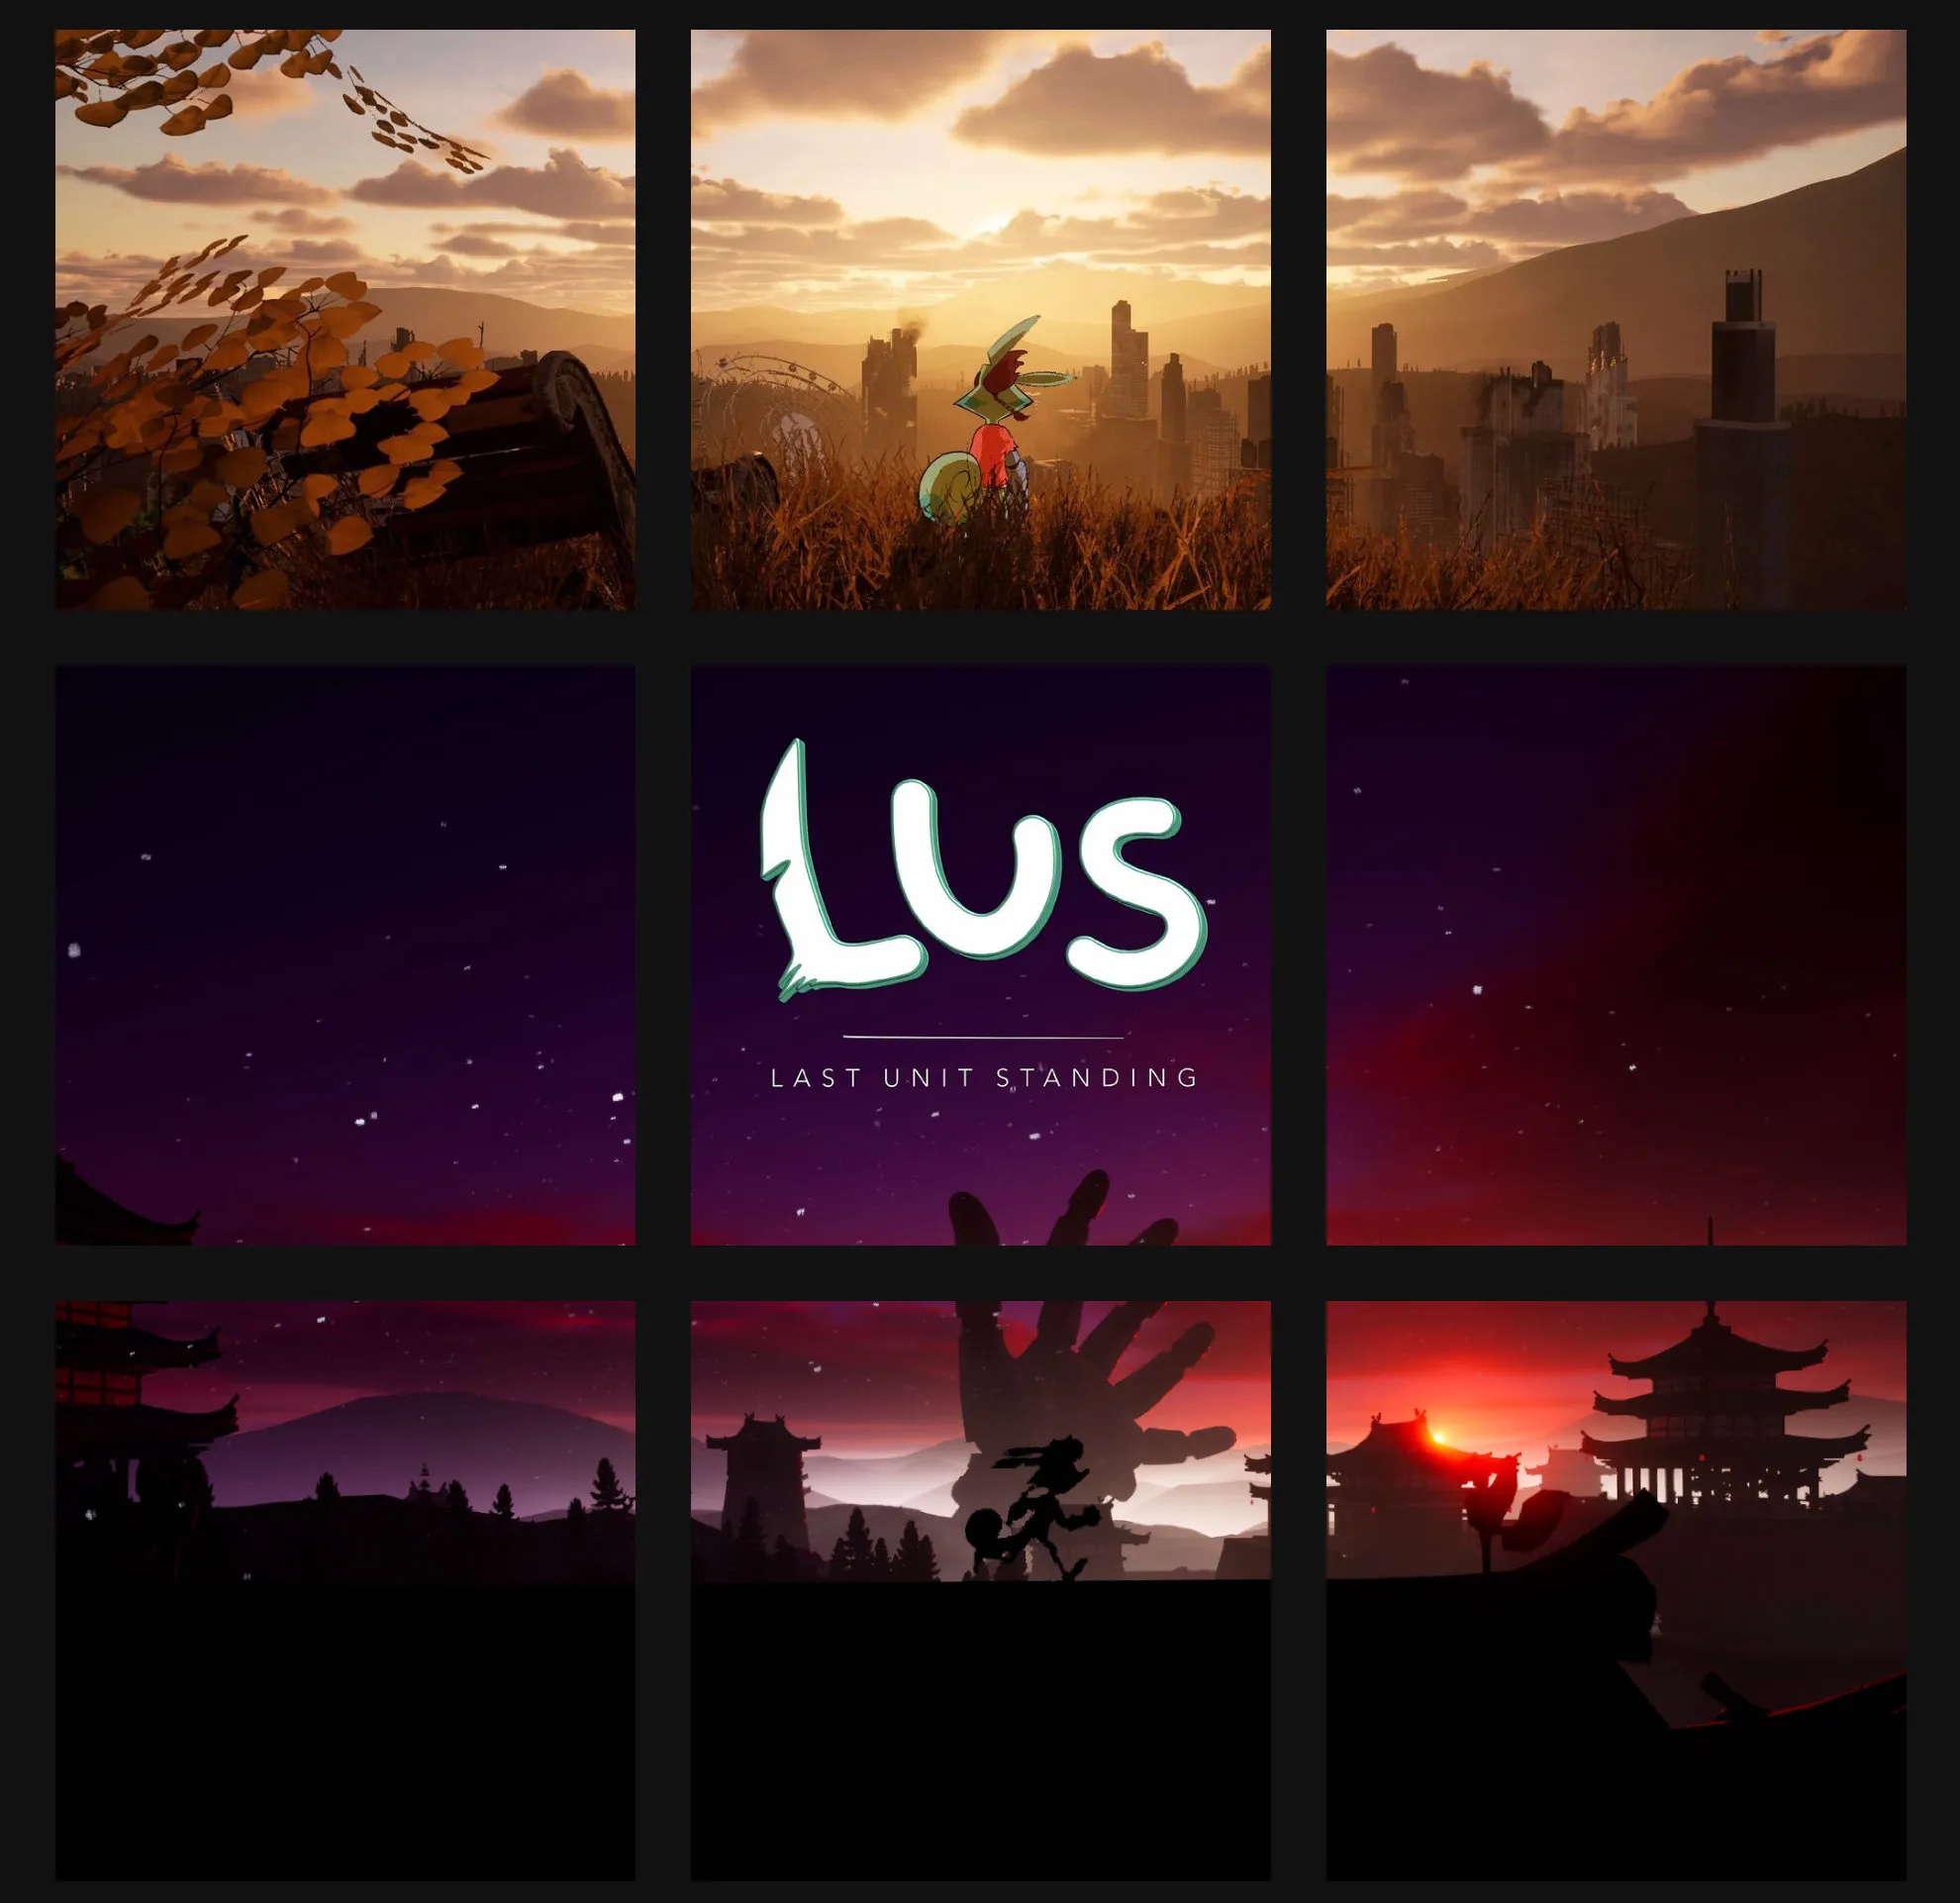 Lus is a new platformer game